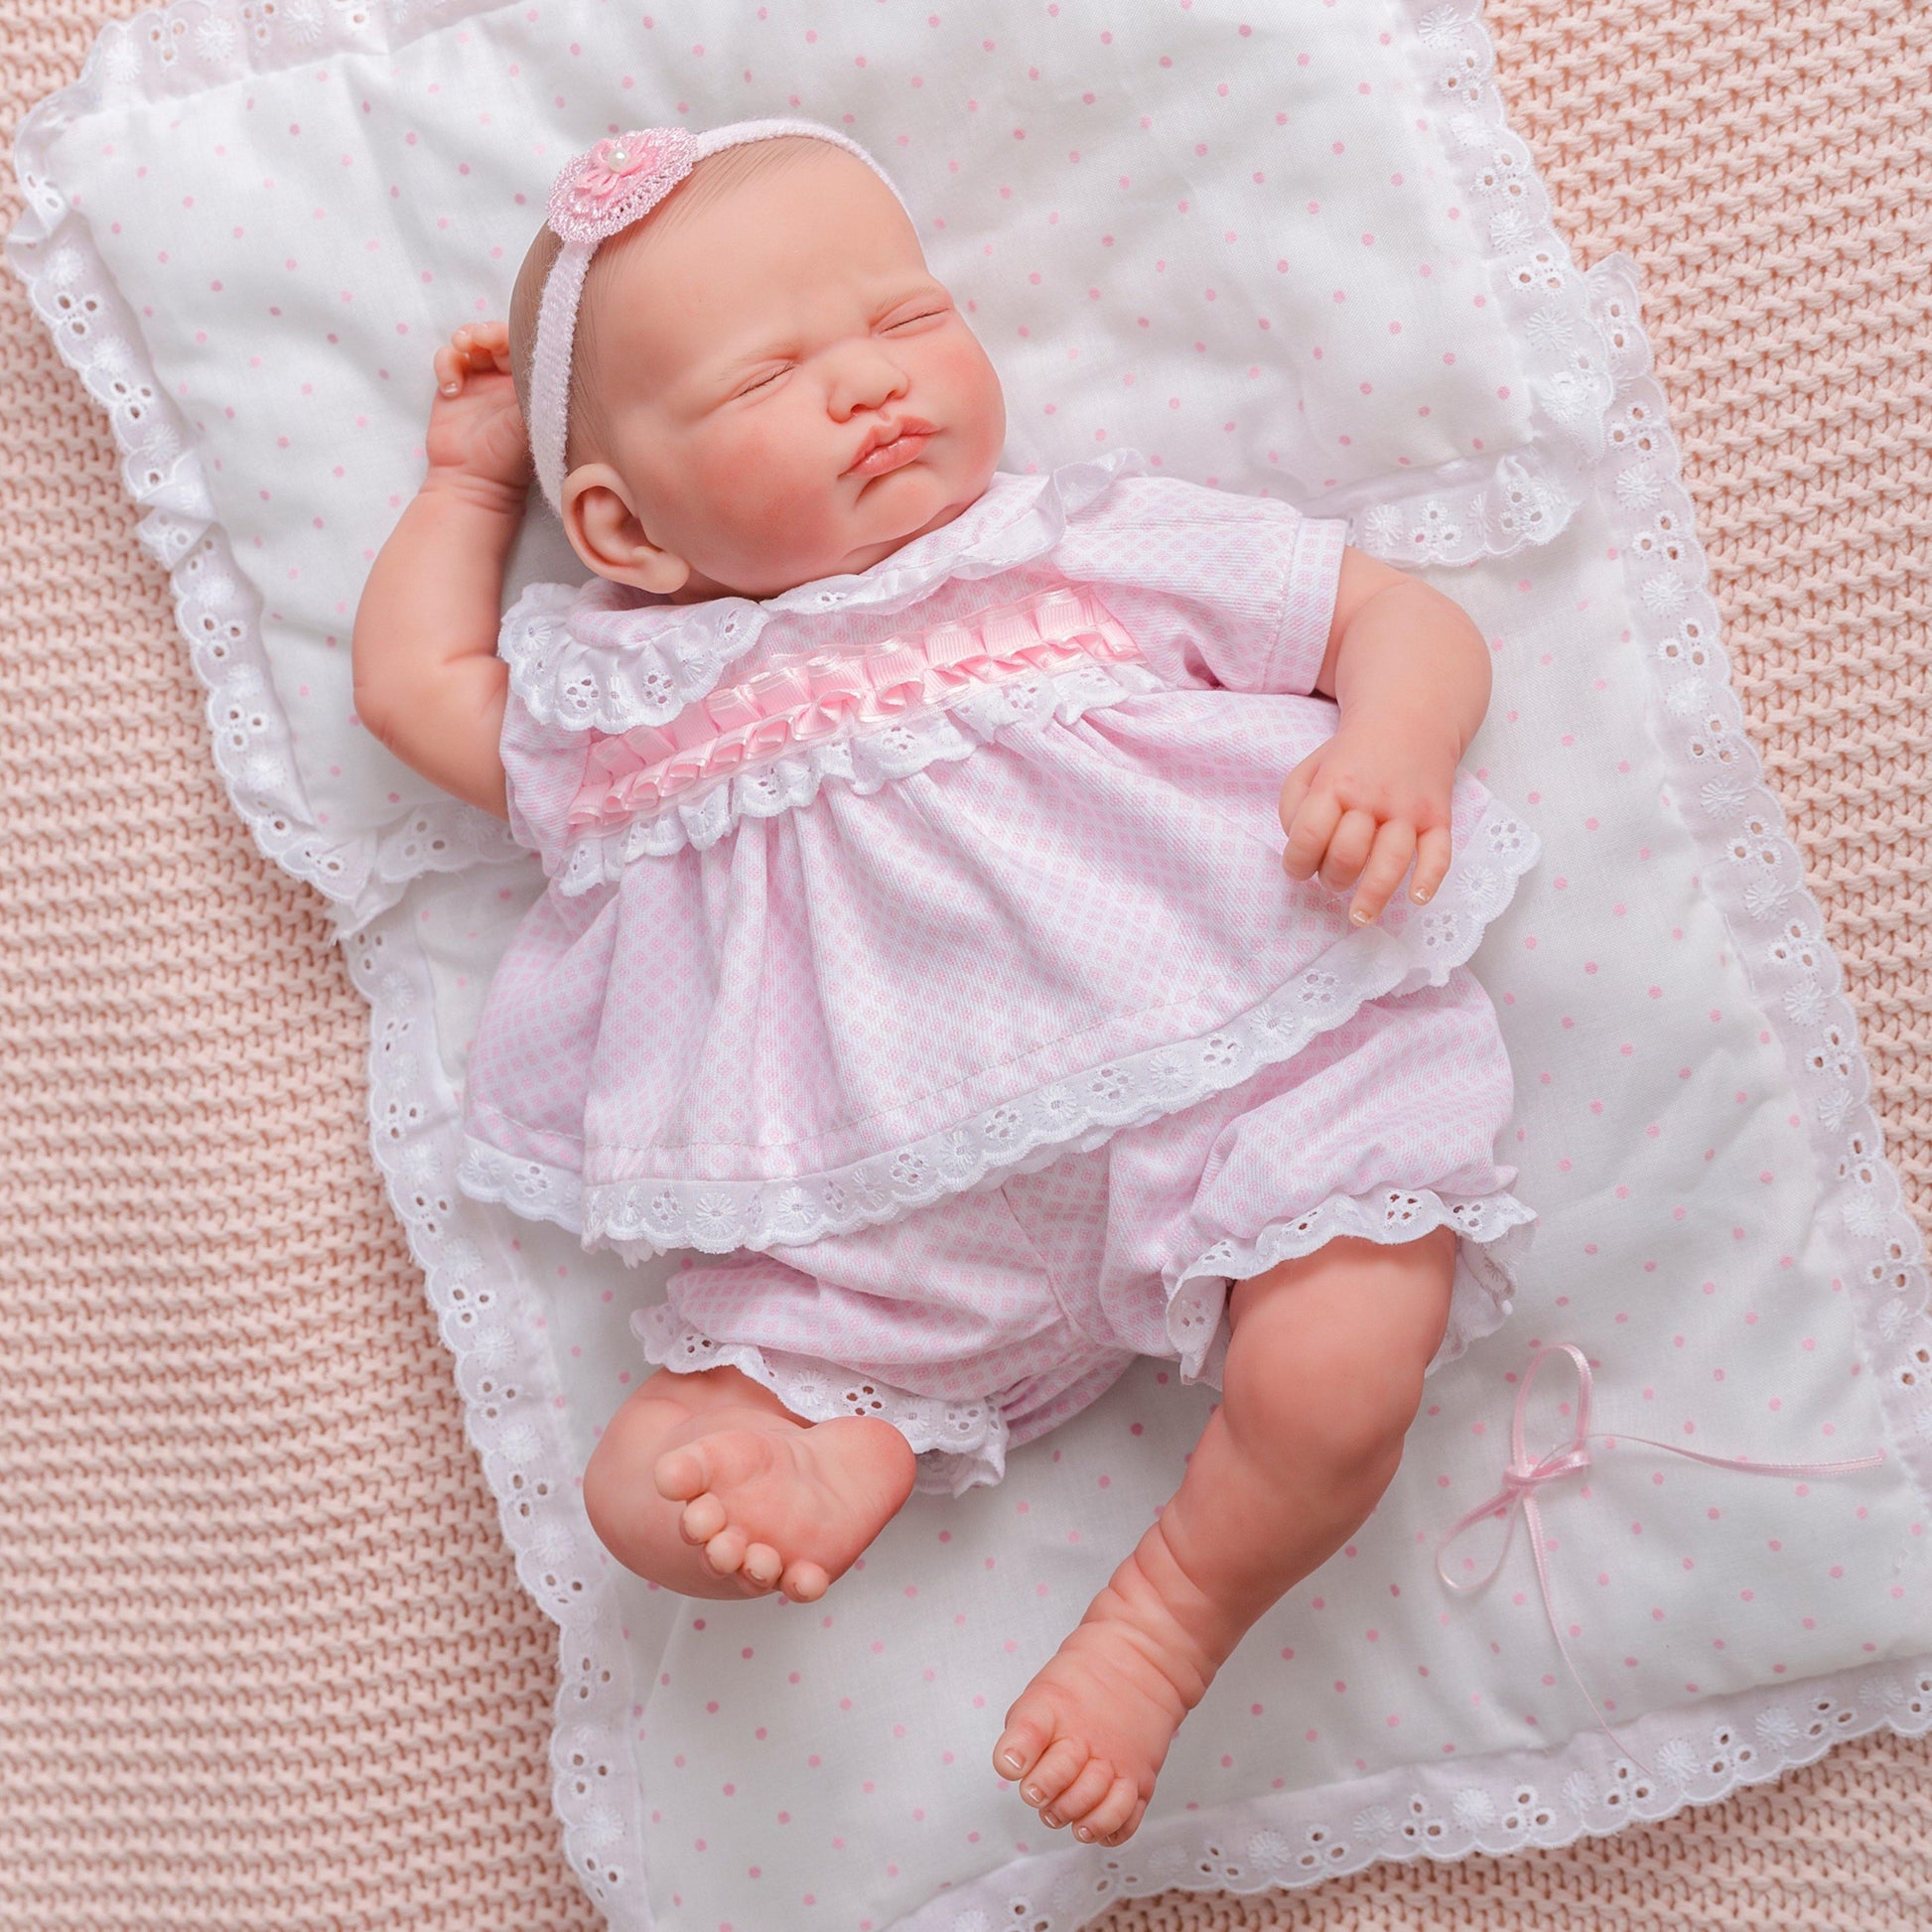 Berenguer Classics Limited Edition Leonor 17 inches Reborn Baby Doll-2019 Award - JC Toys Group Inc.